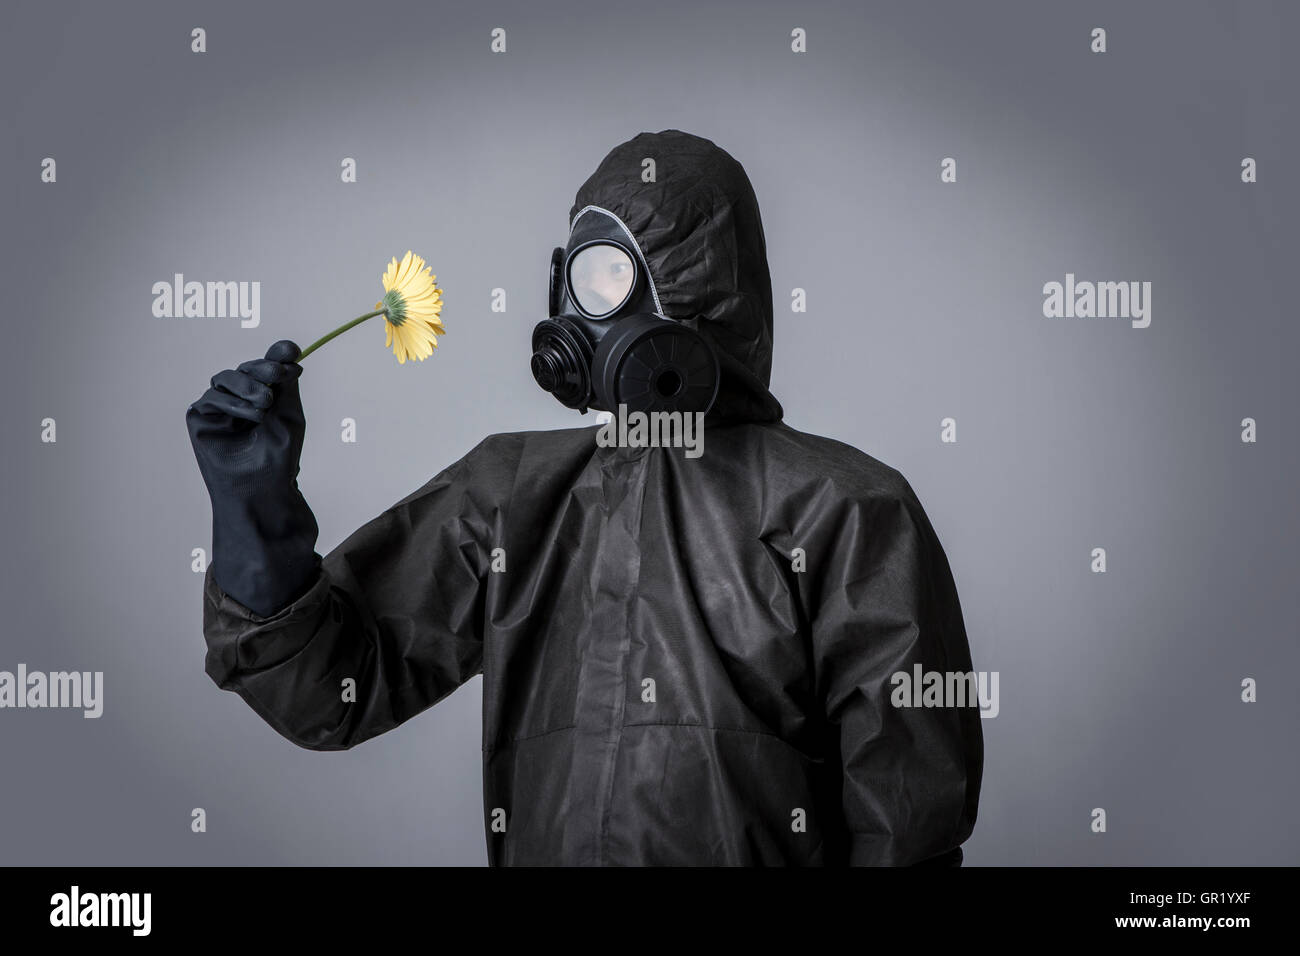 Young man wearing gas mask and black clothes smelling flower Stock Photo